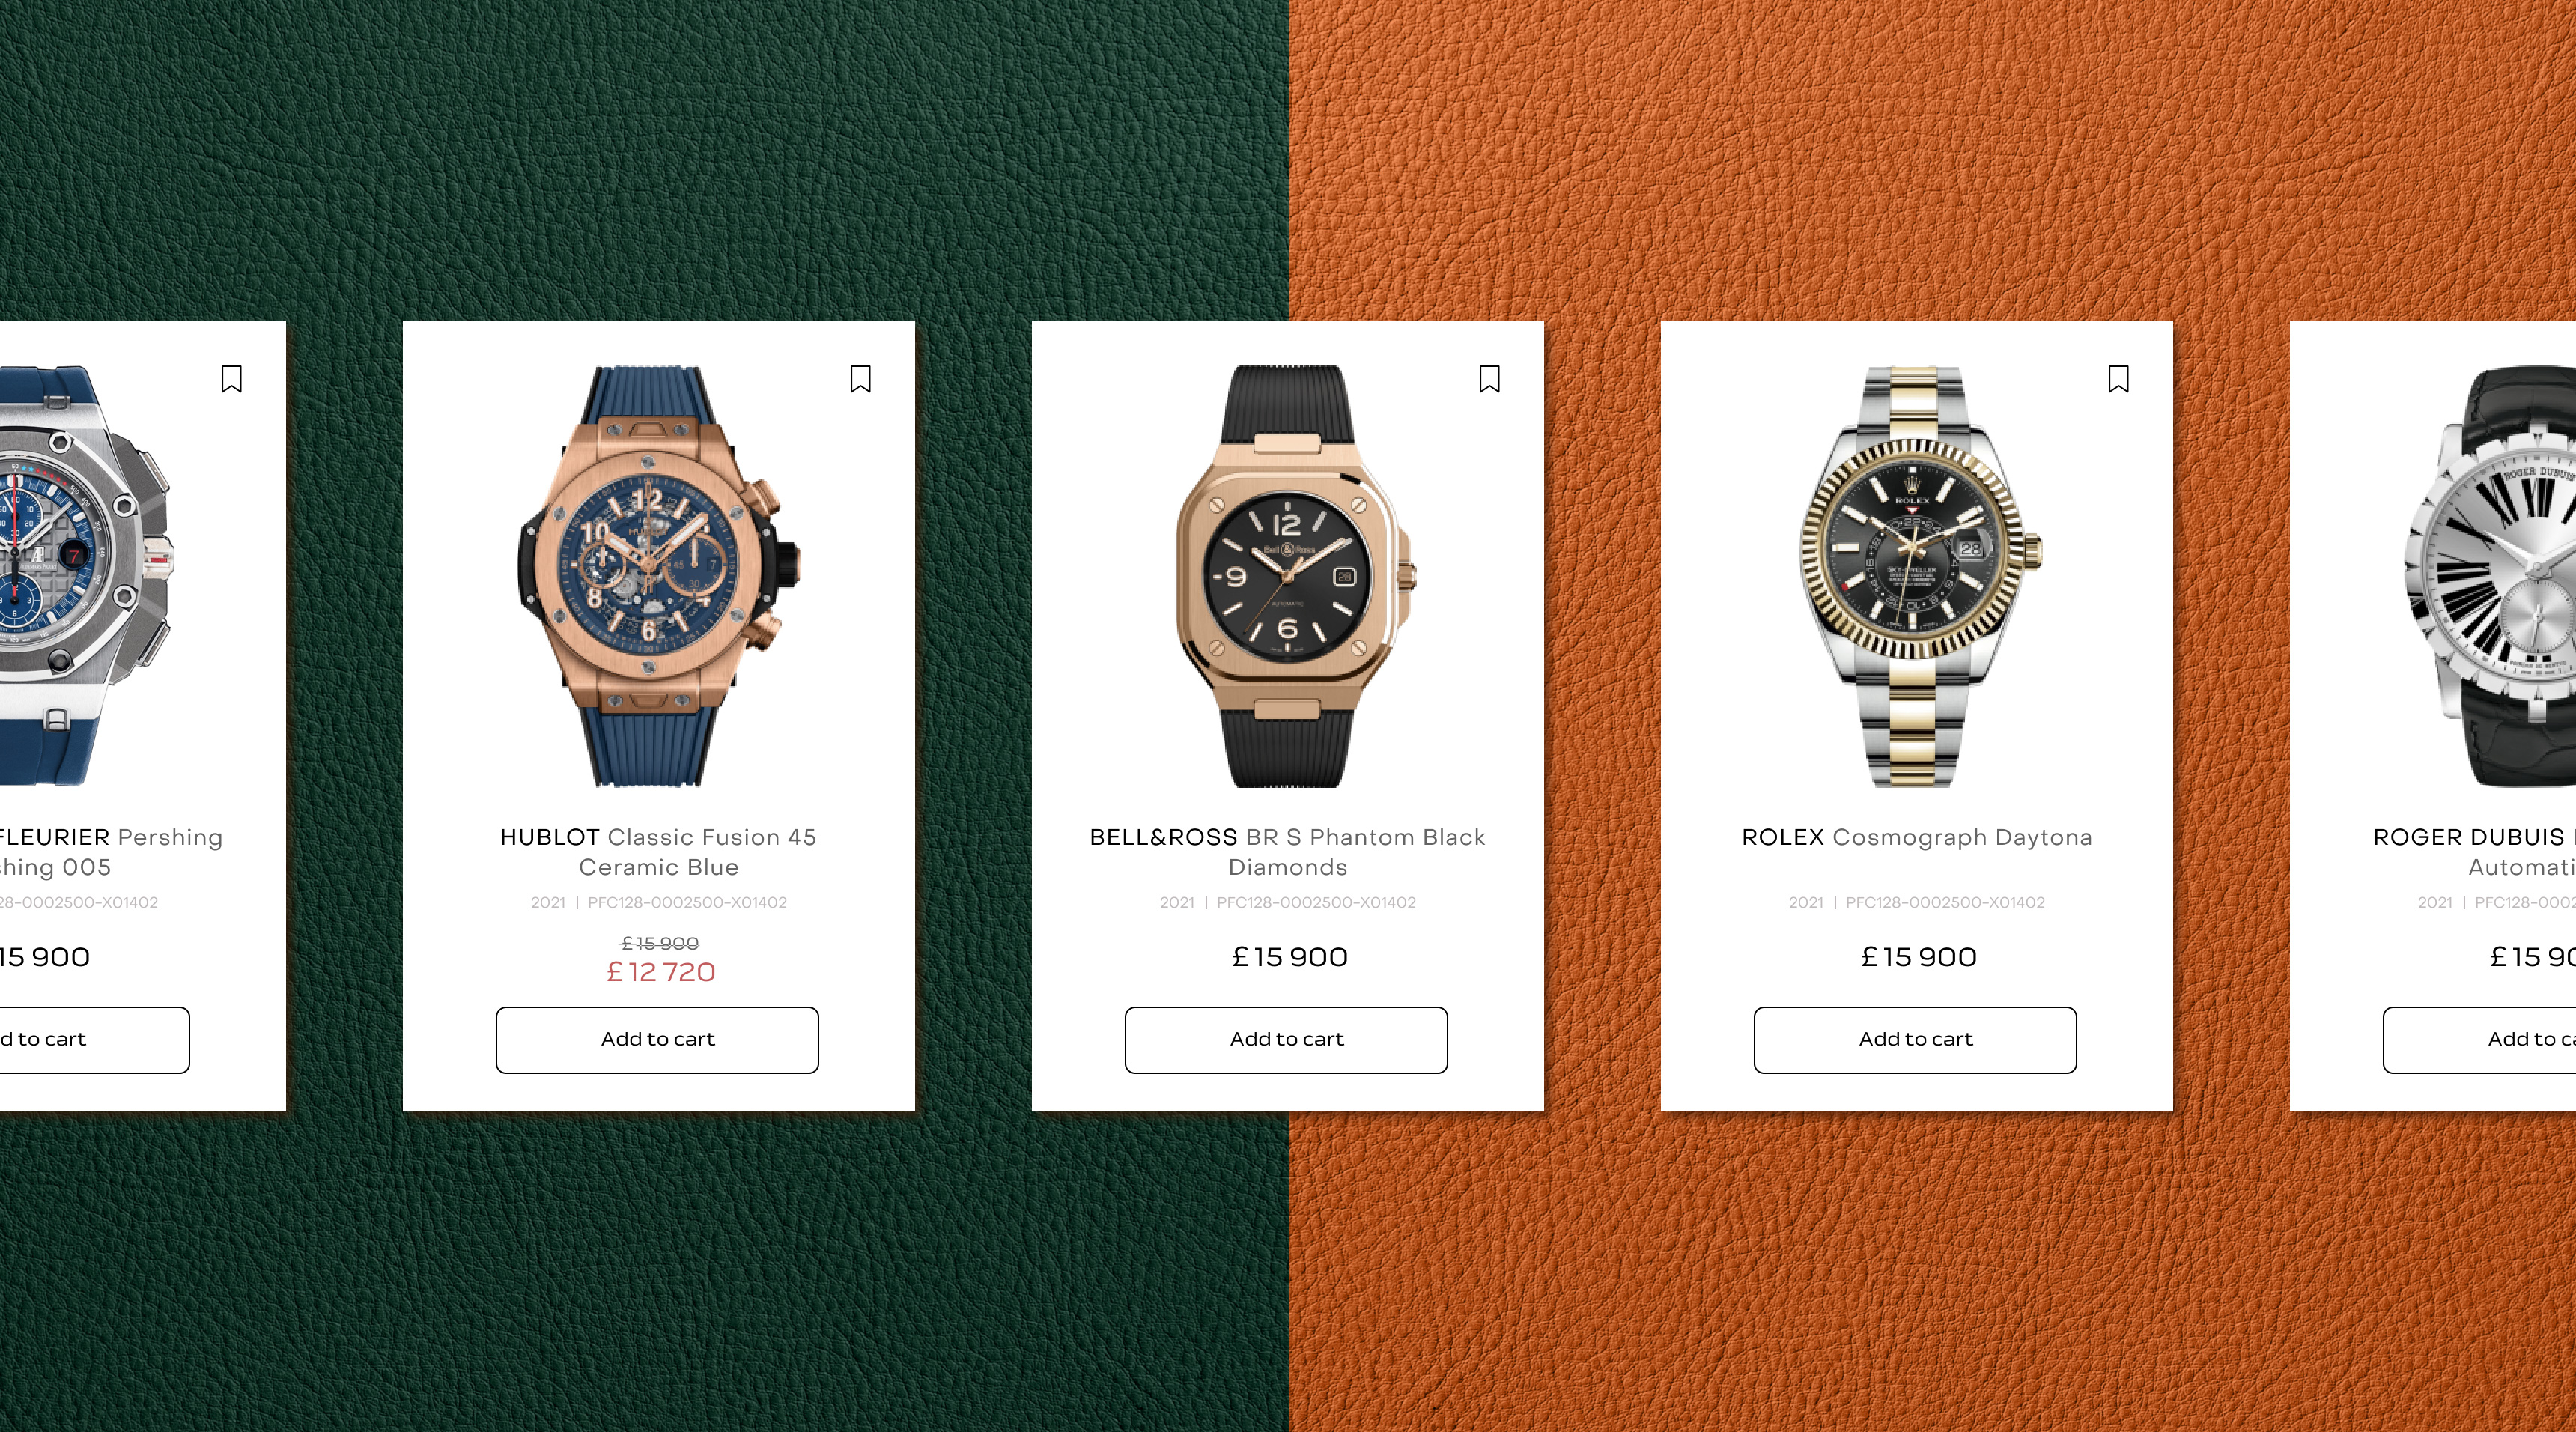 Online store watch product cards on an orange and green background.